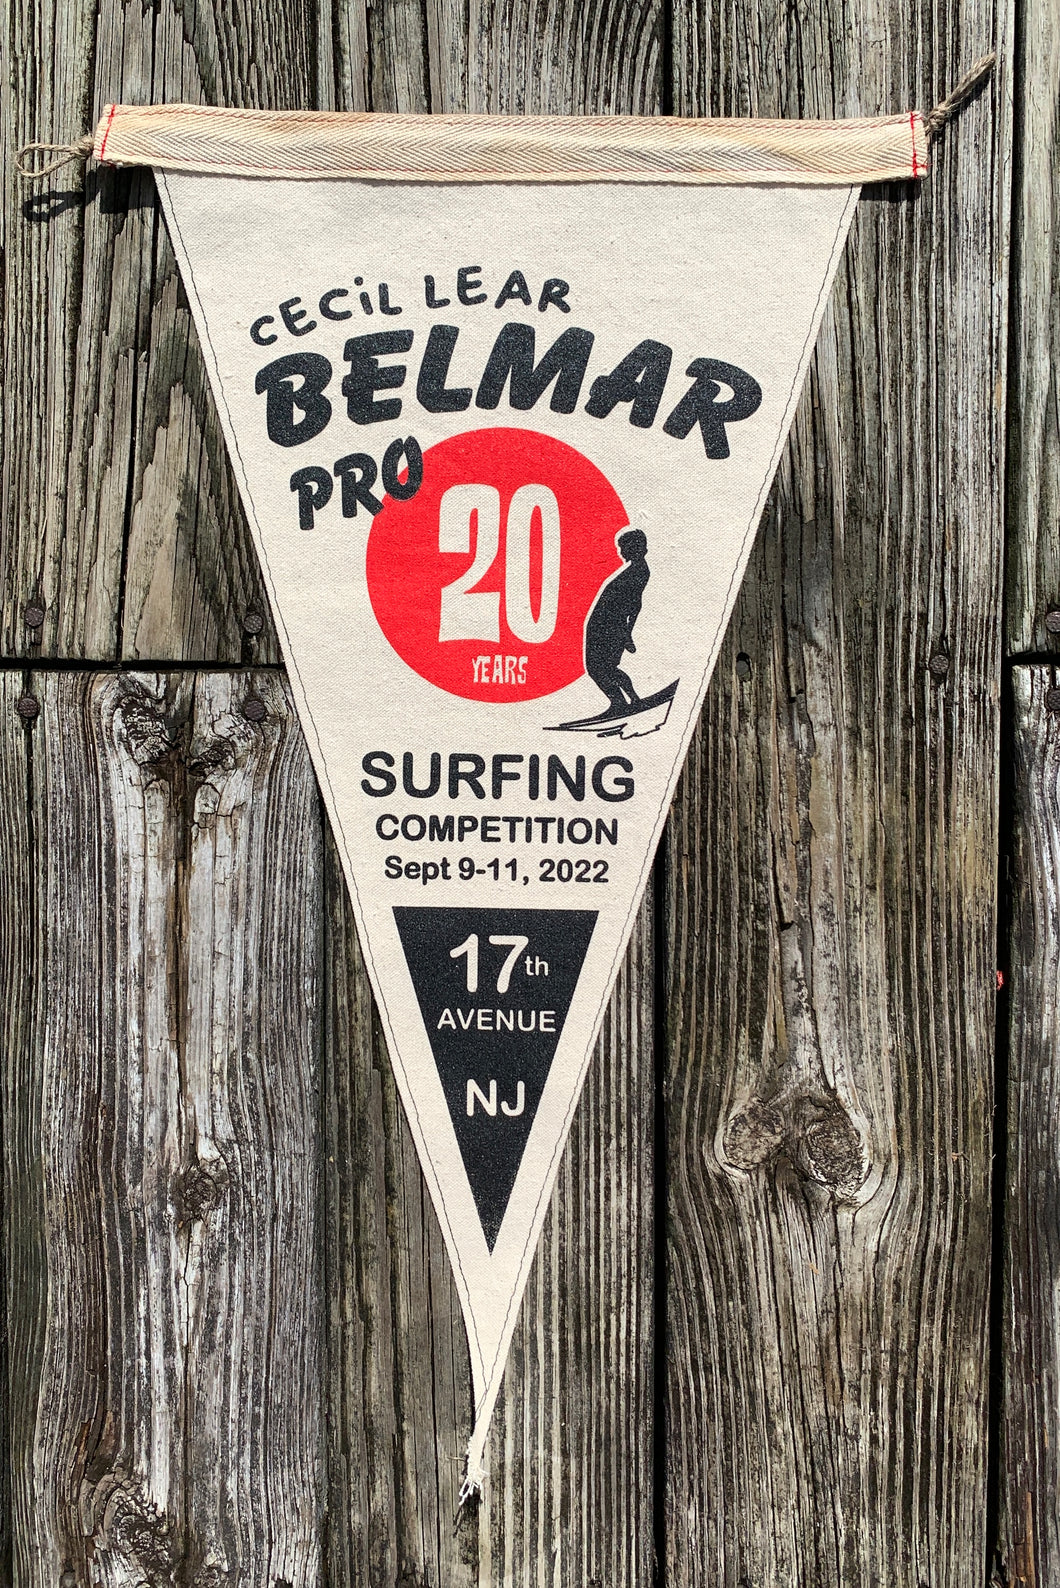 Belmar Pro 2022 surf pennant flag - Remembering Cecil Lear